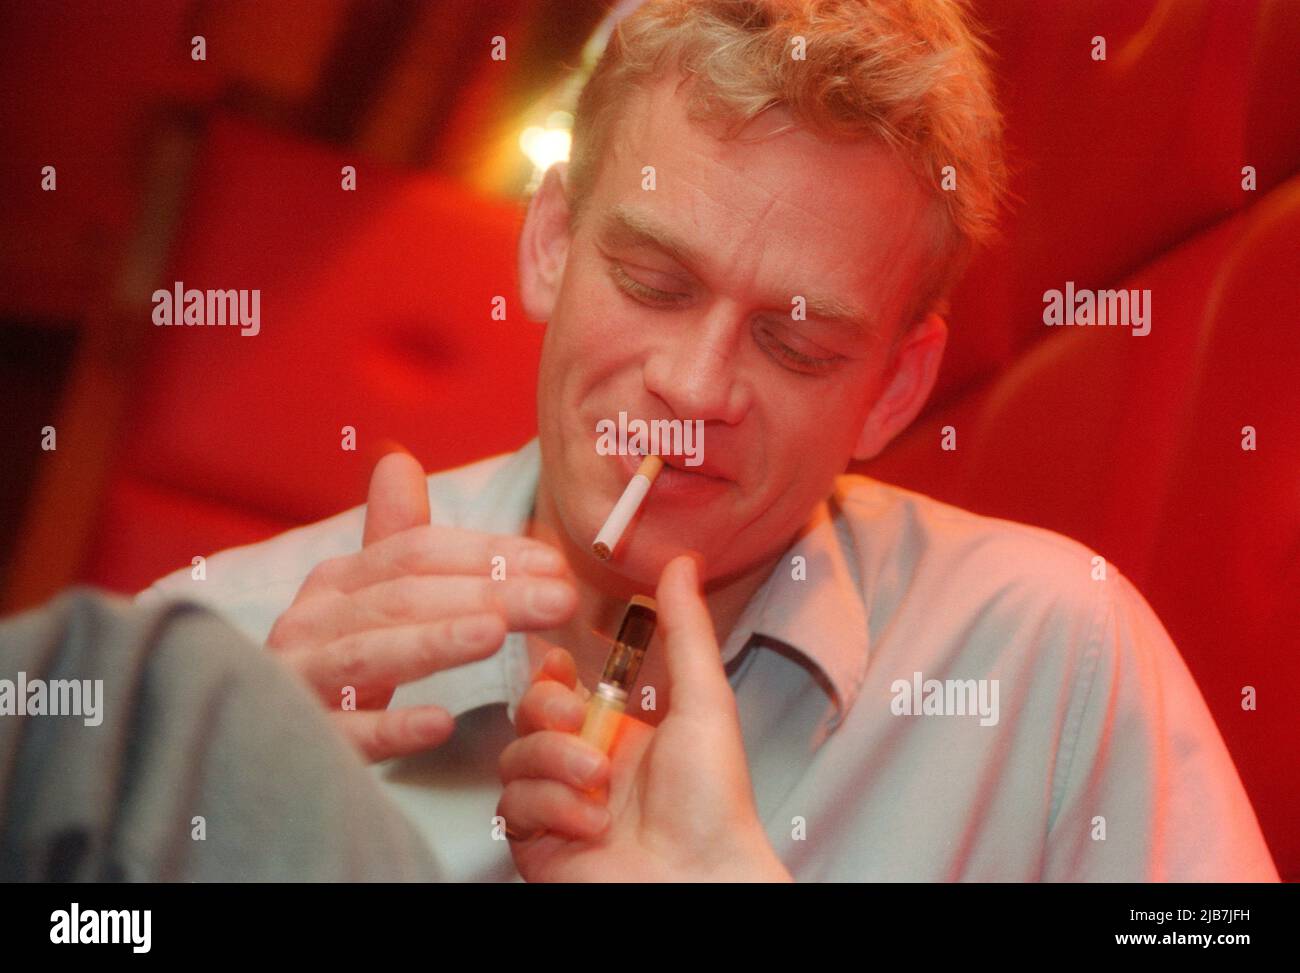 male lighting a cigarette with a zippo lighter Stock Photo